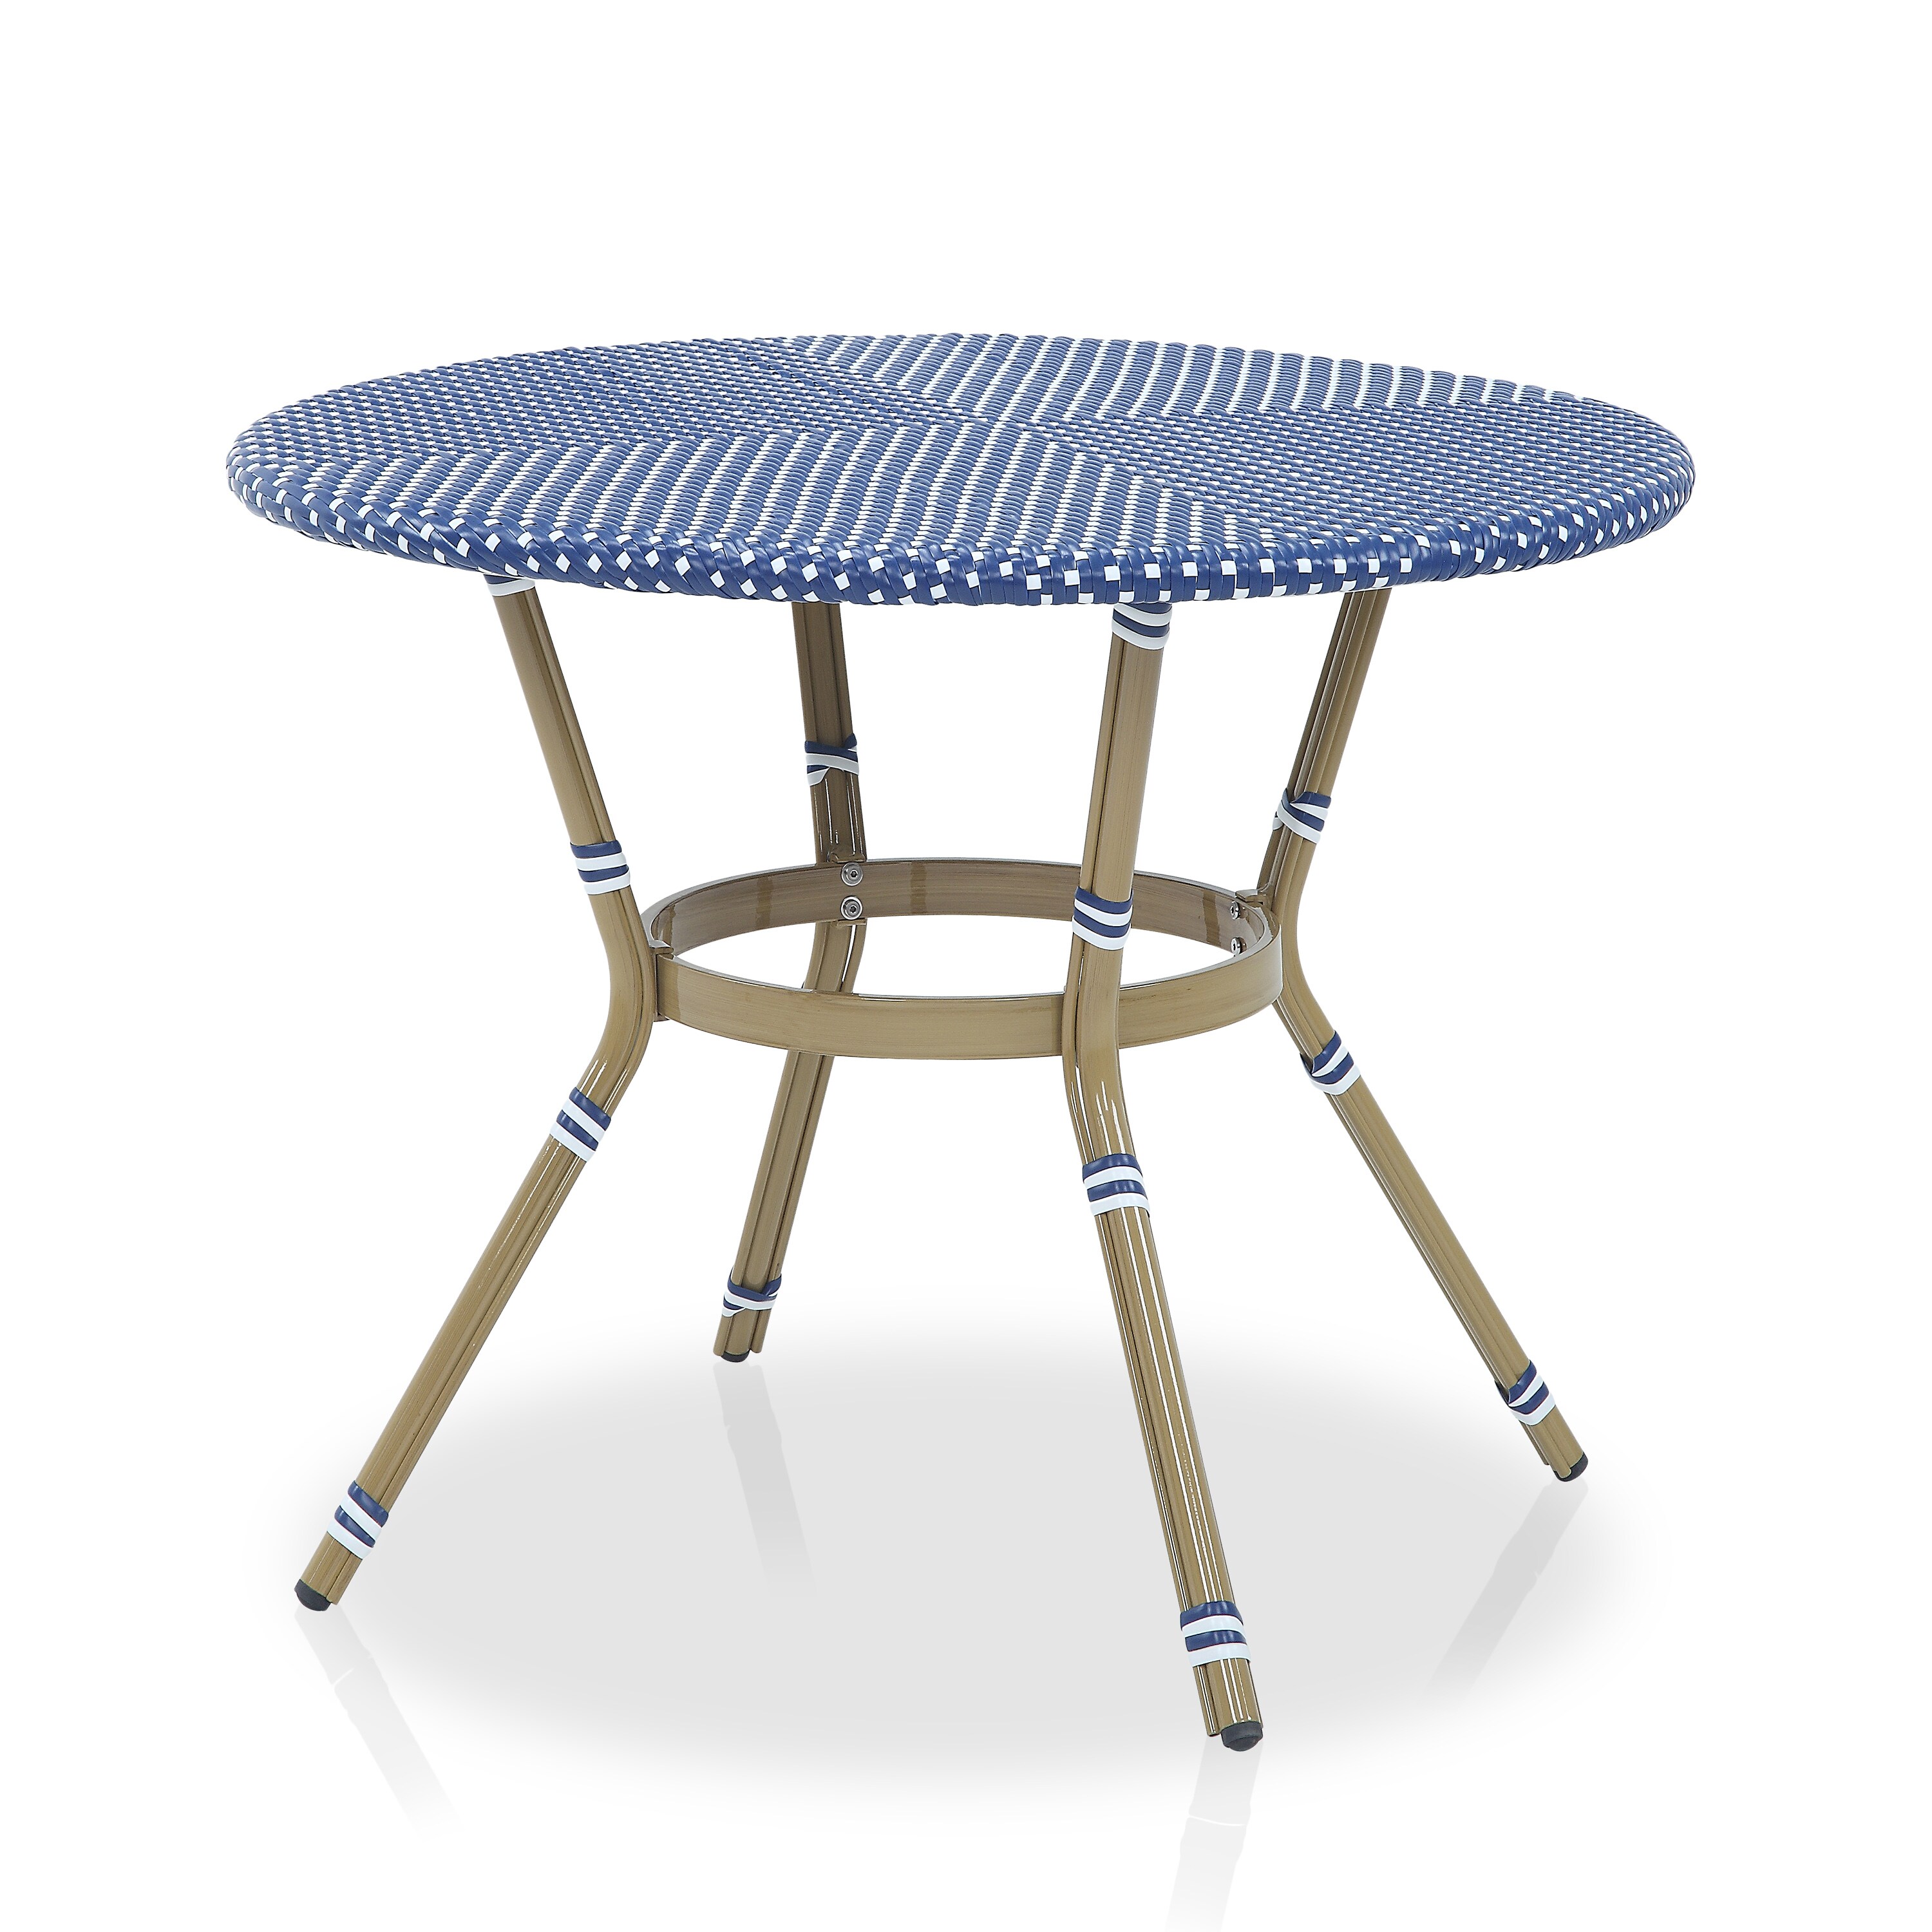 Furniture of America Round Wicker Outdoor Dining Table 39.38-in W x 39.